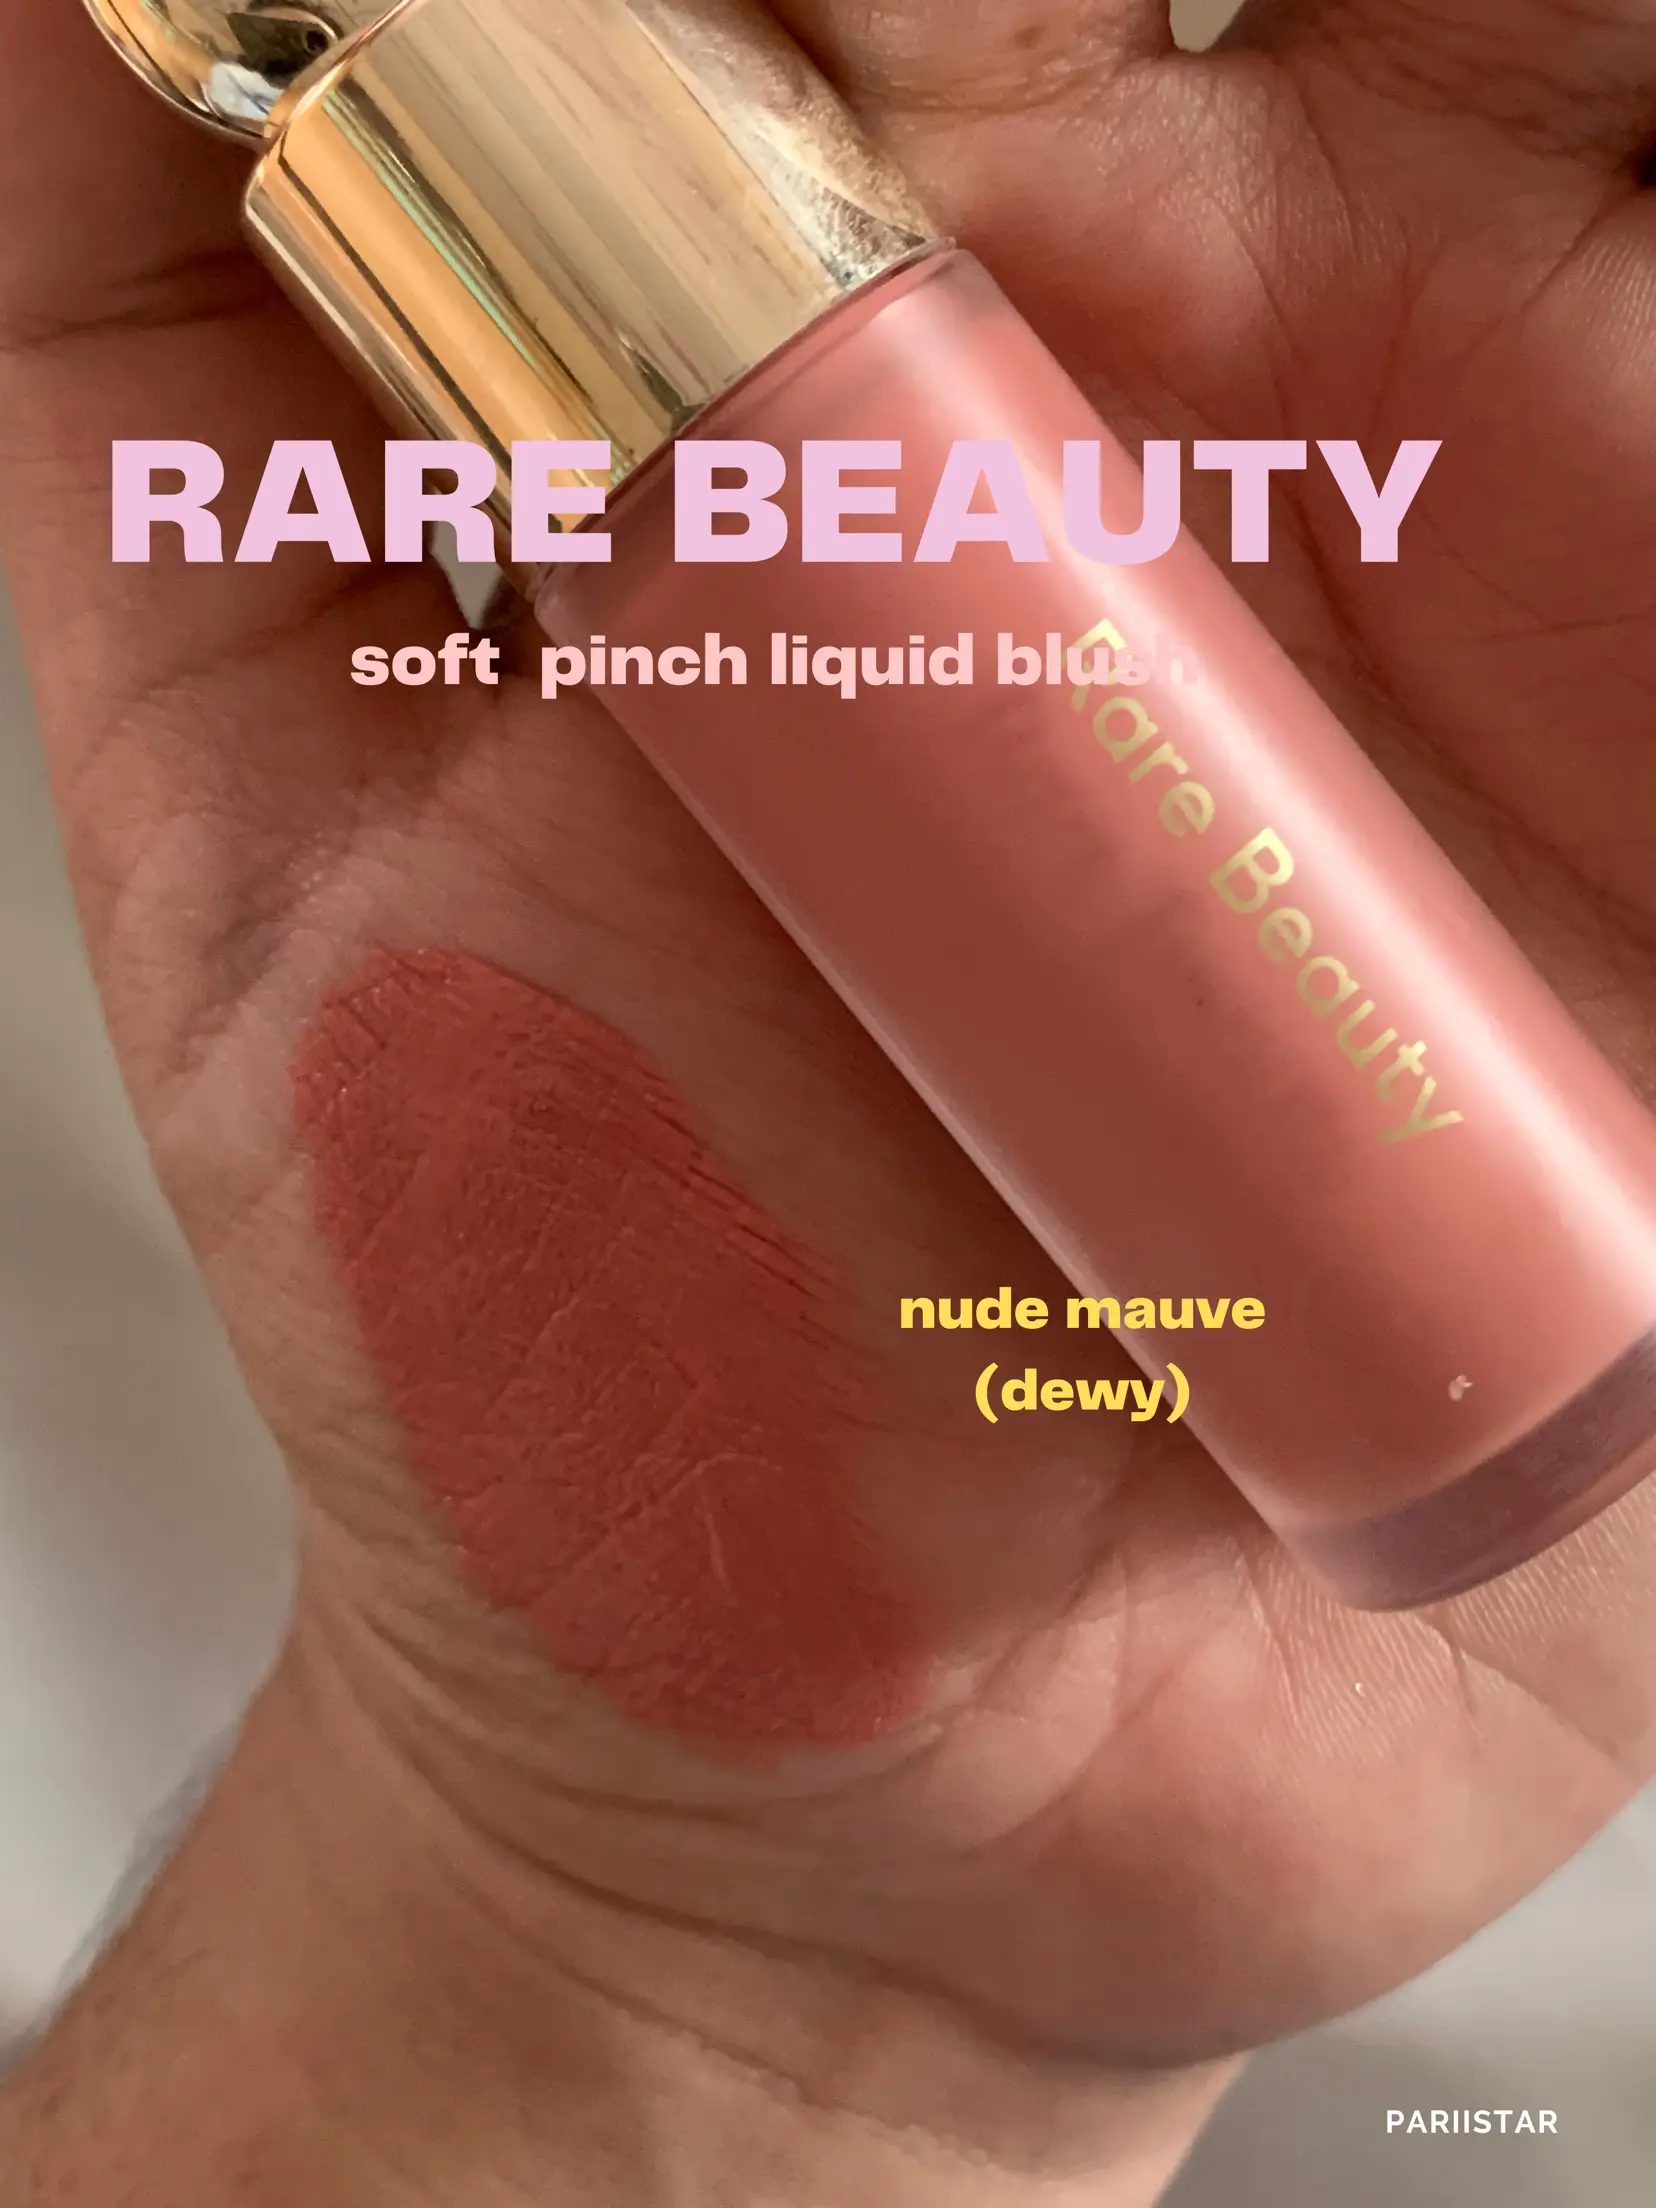 Hope - Rare Beauty, Blush Hits✨, Gallery posted by opor